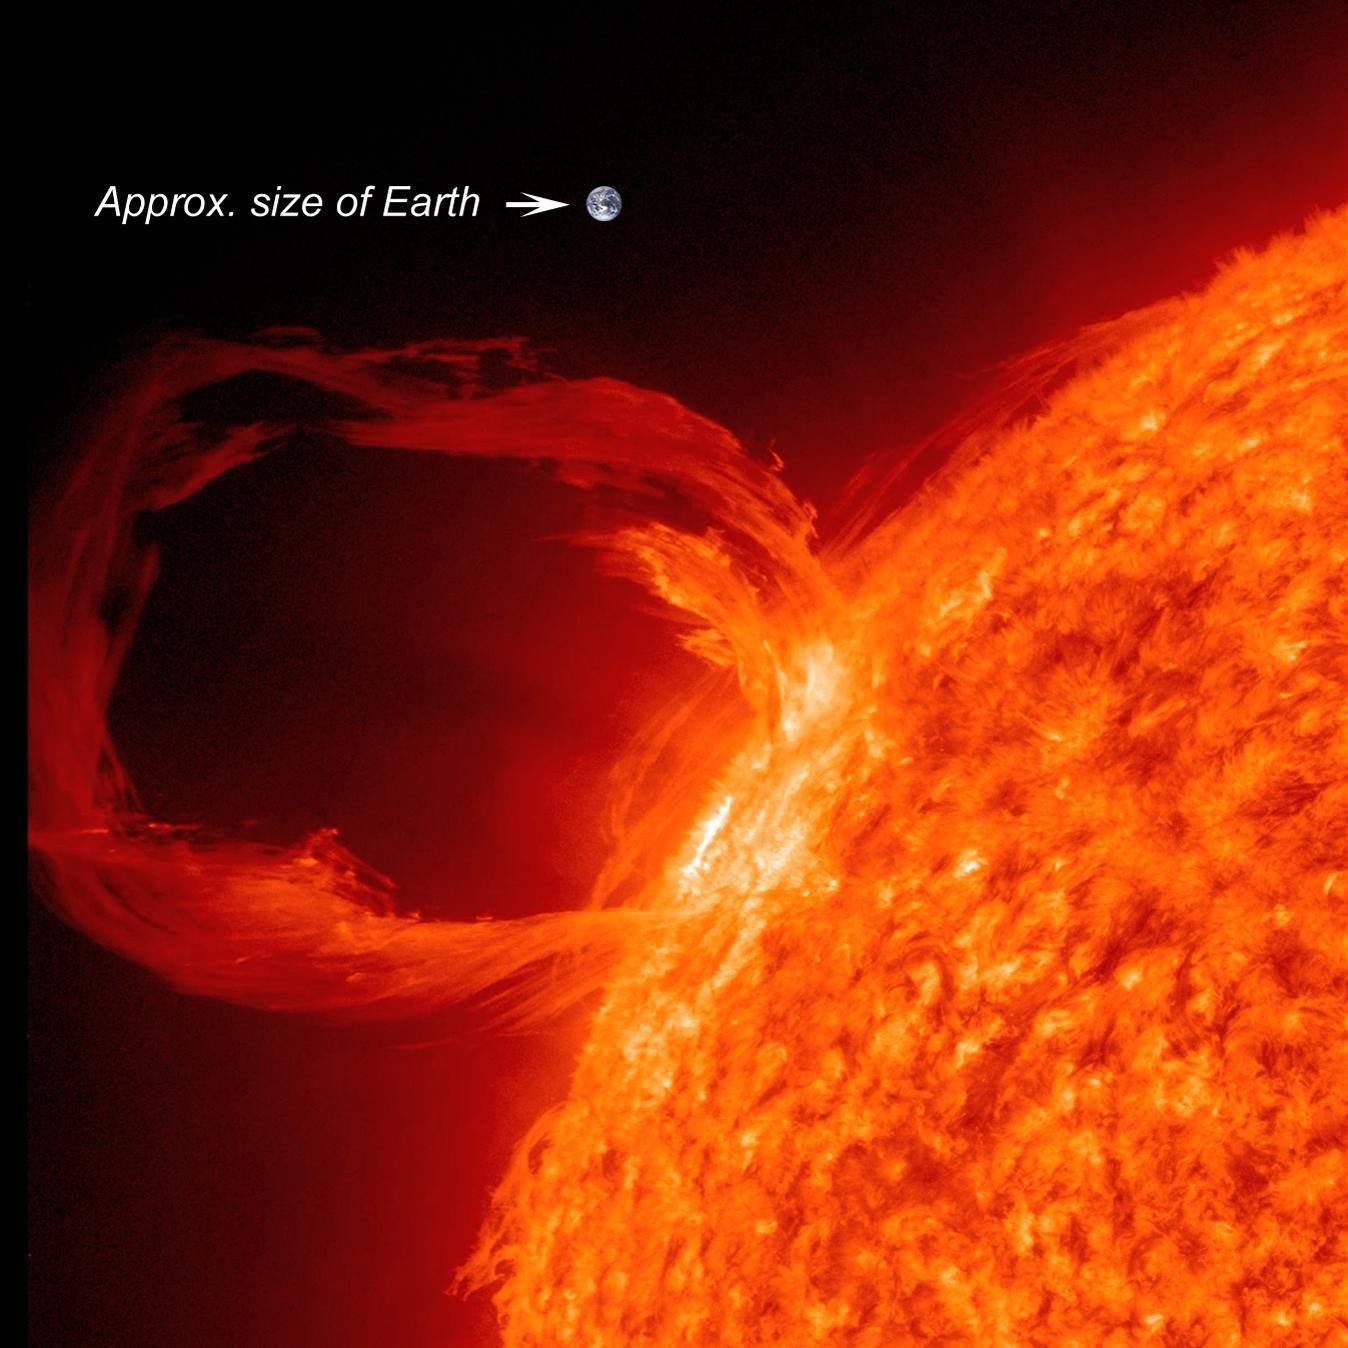 A larger flare makes the Earth look even smaller by comparison